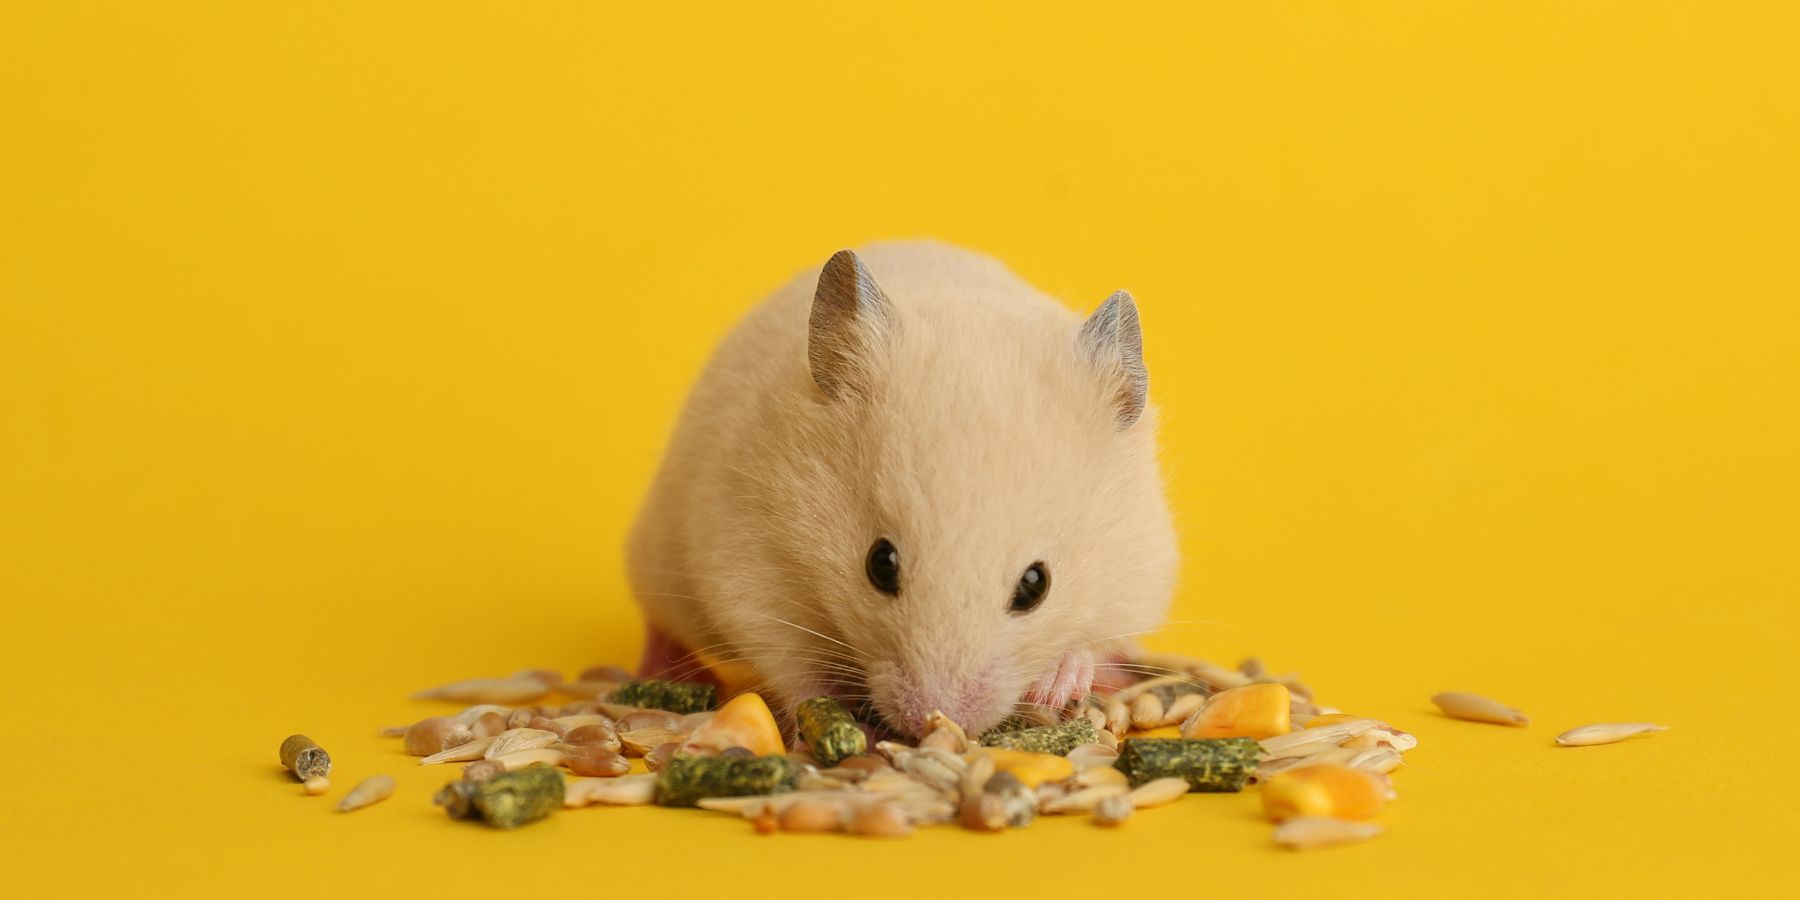 What Vegetables Can Hamsters Eat? A Comprehensive List